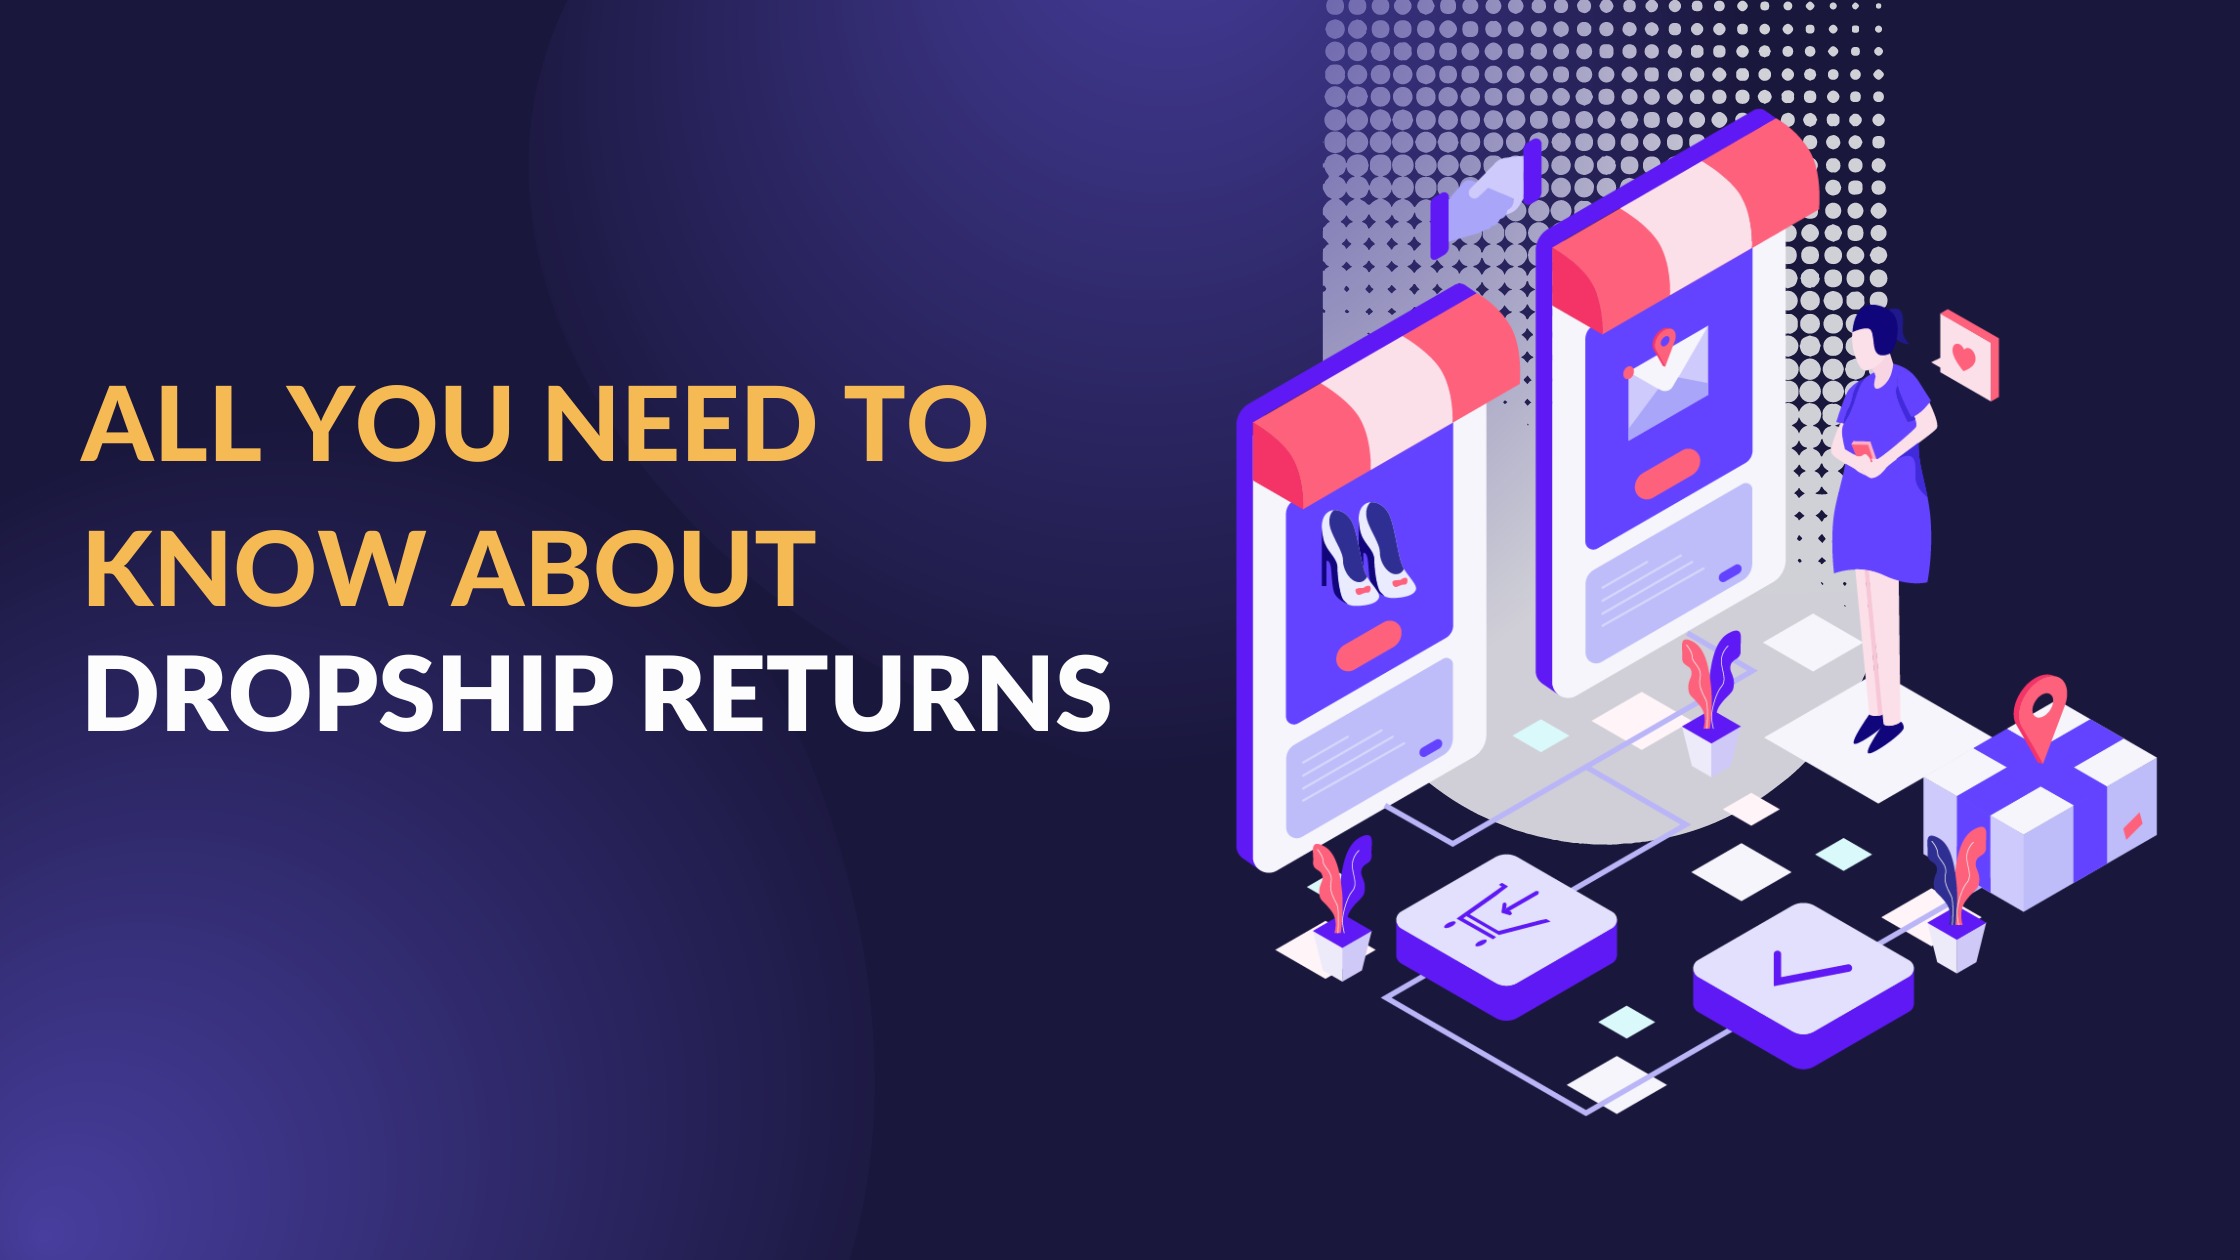 All you Need to Know About Dropship Returns